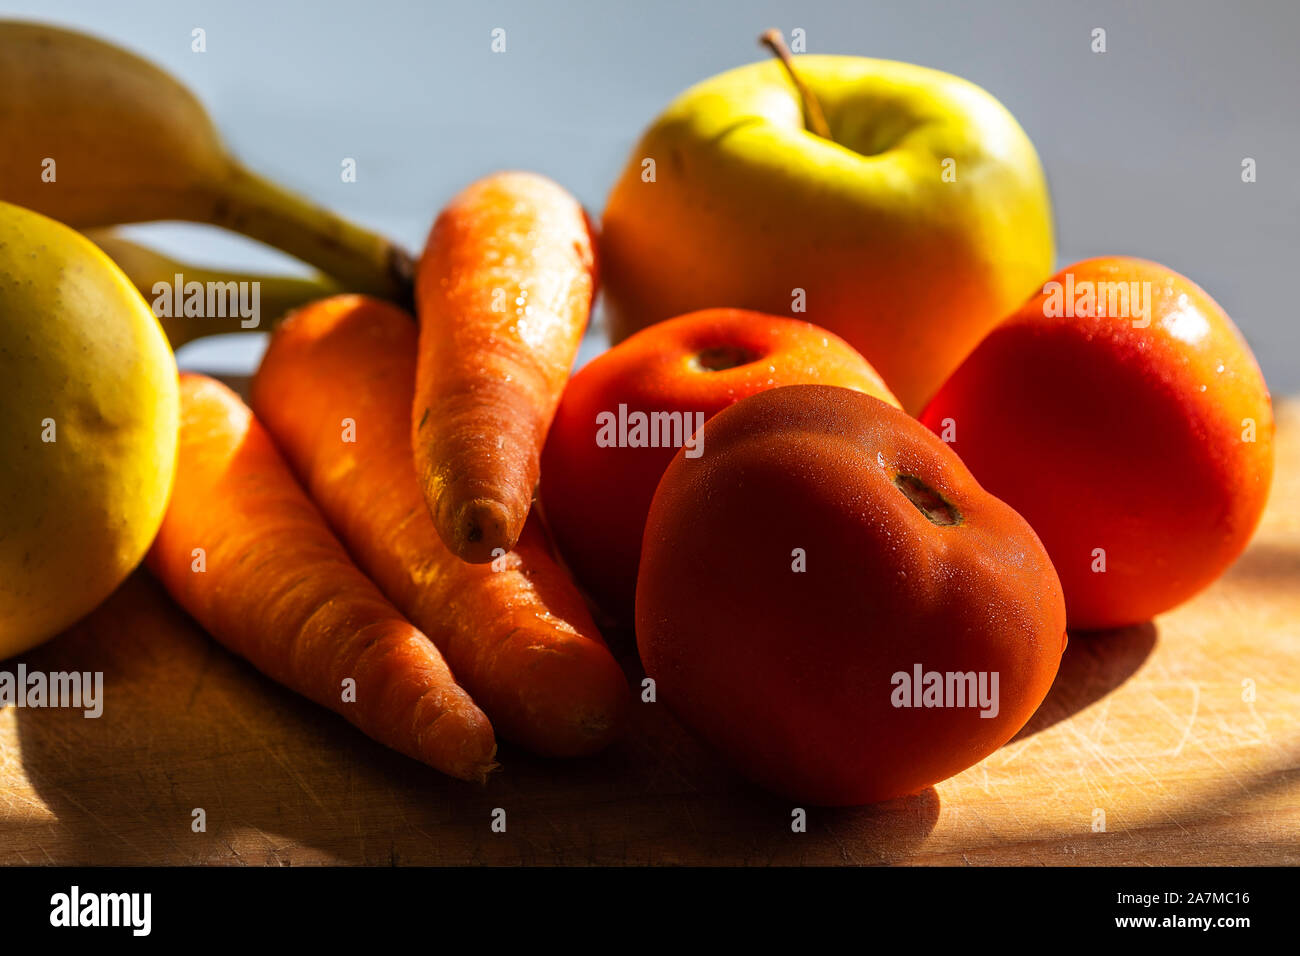 Fresh Mixed Fruits With Vegetables Healthy Food, on colorful blurry background. Stock Photo